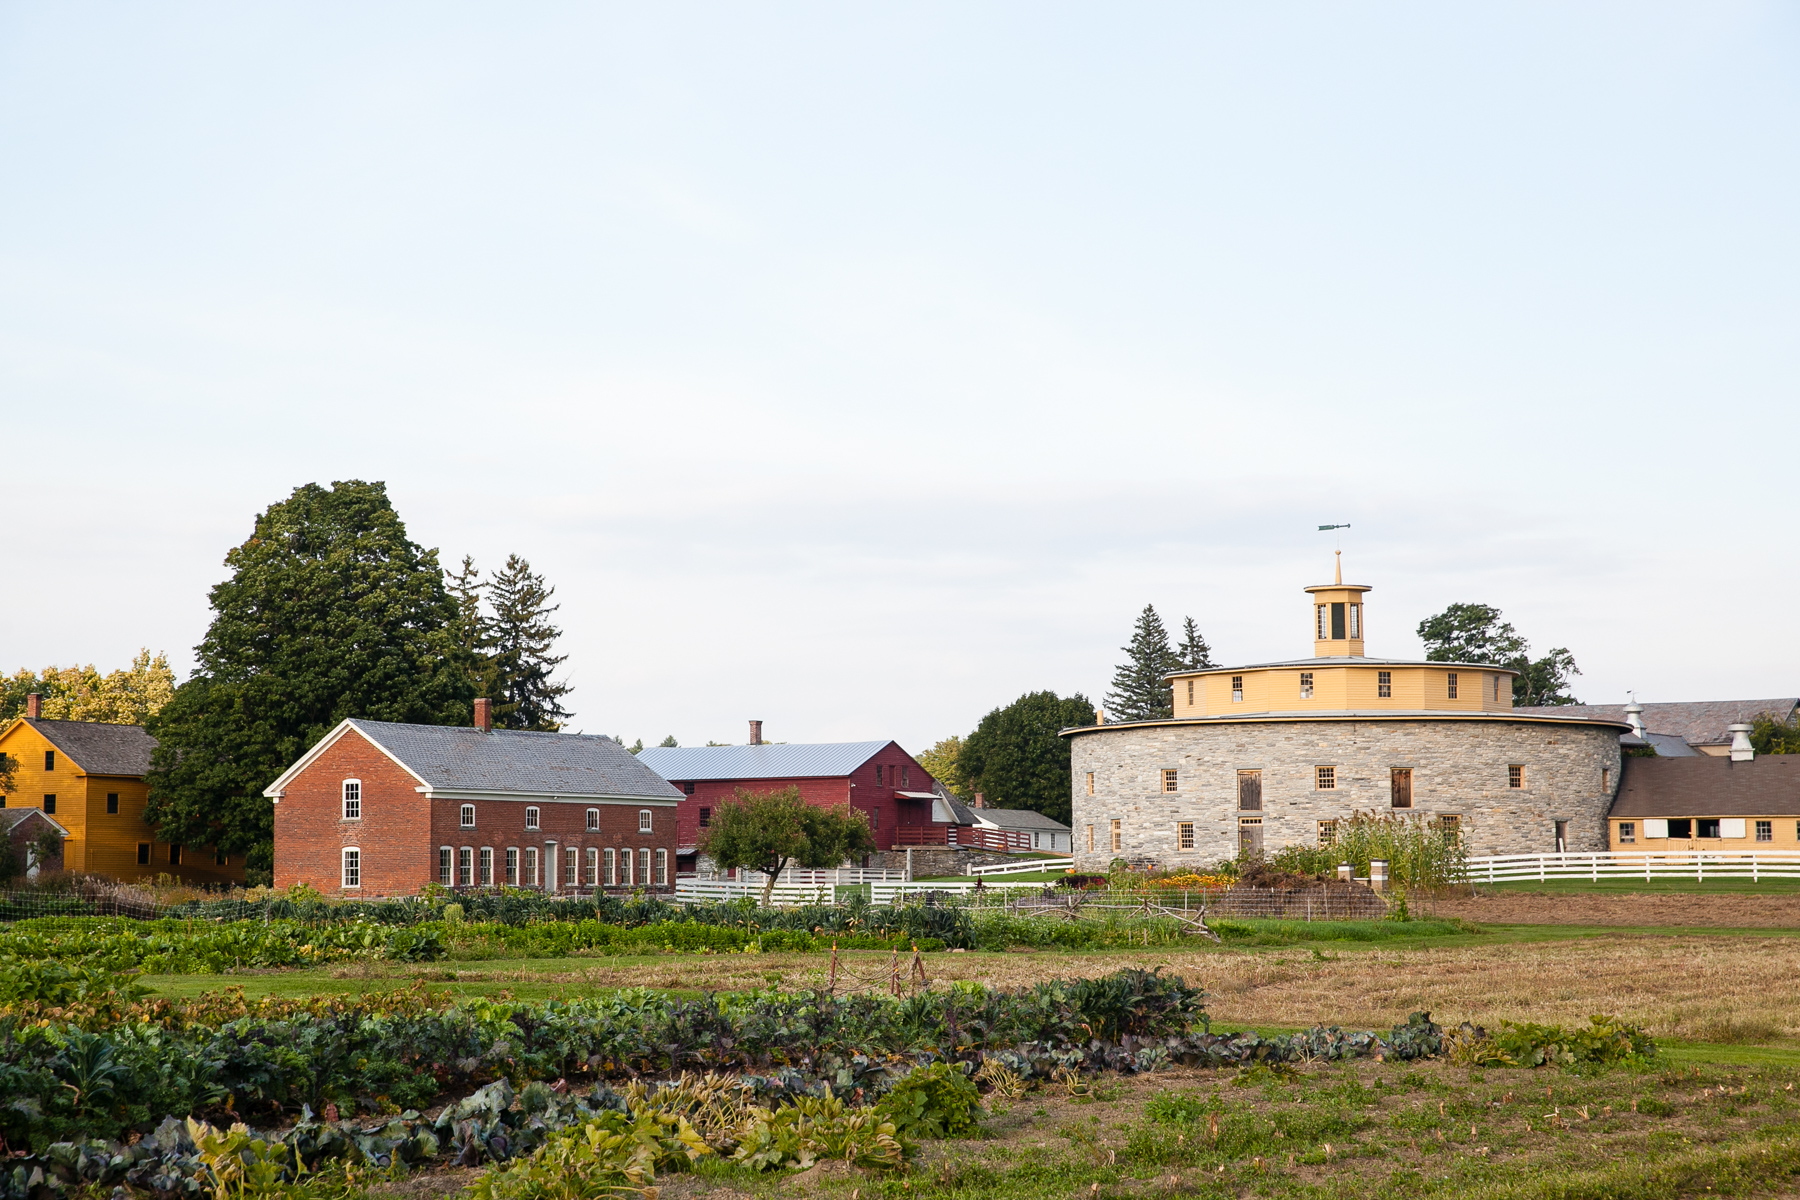 A view of the picturesque meadows at hancock shaker village